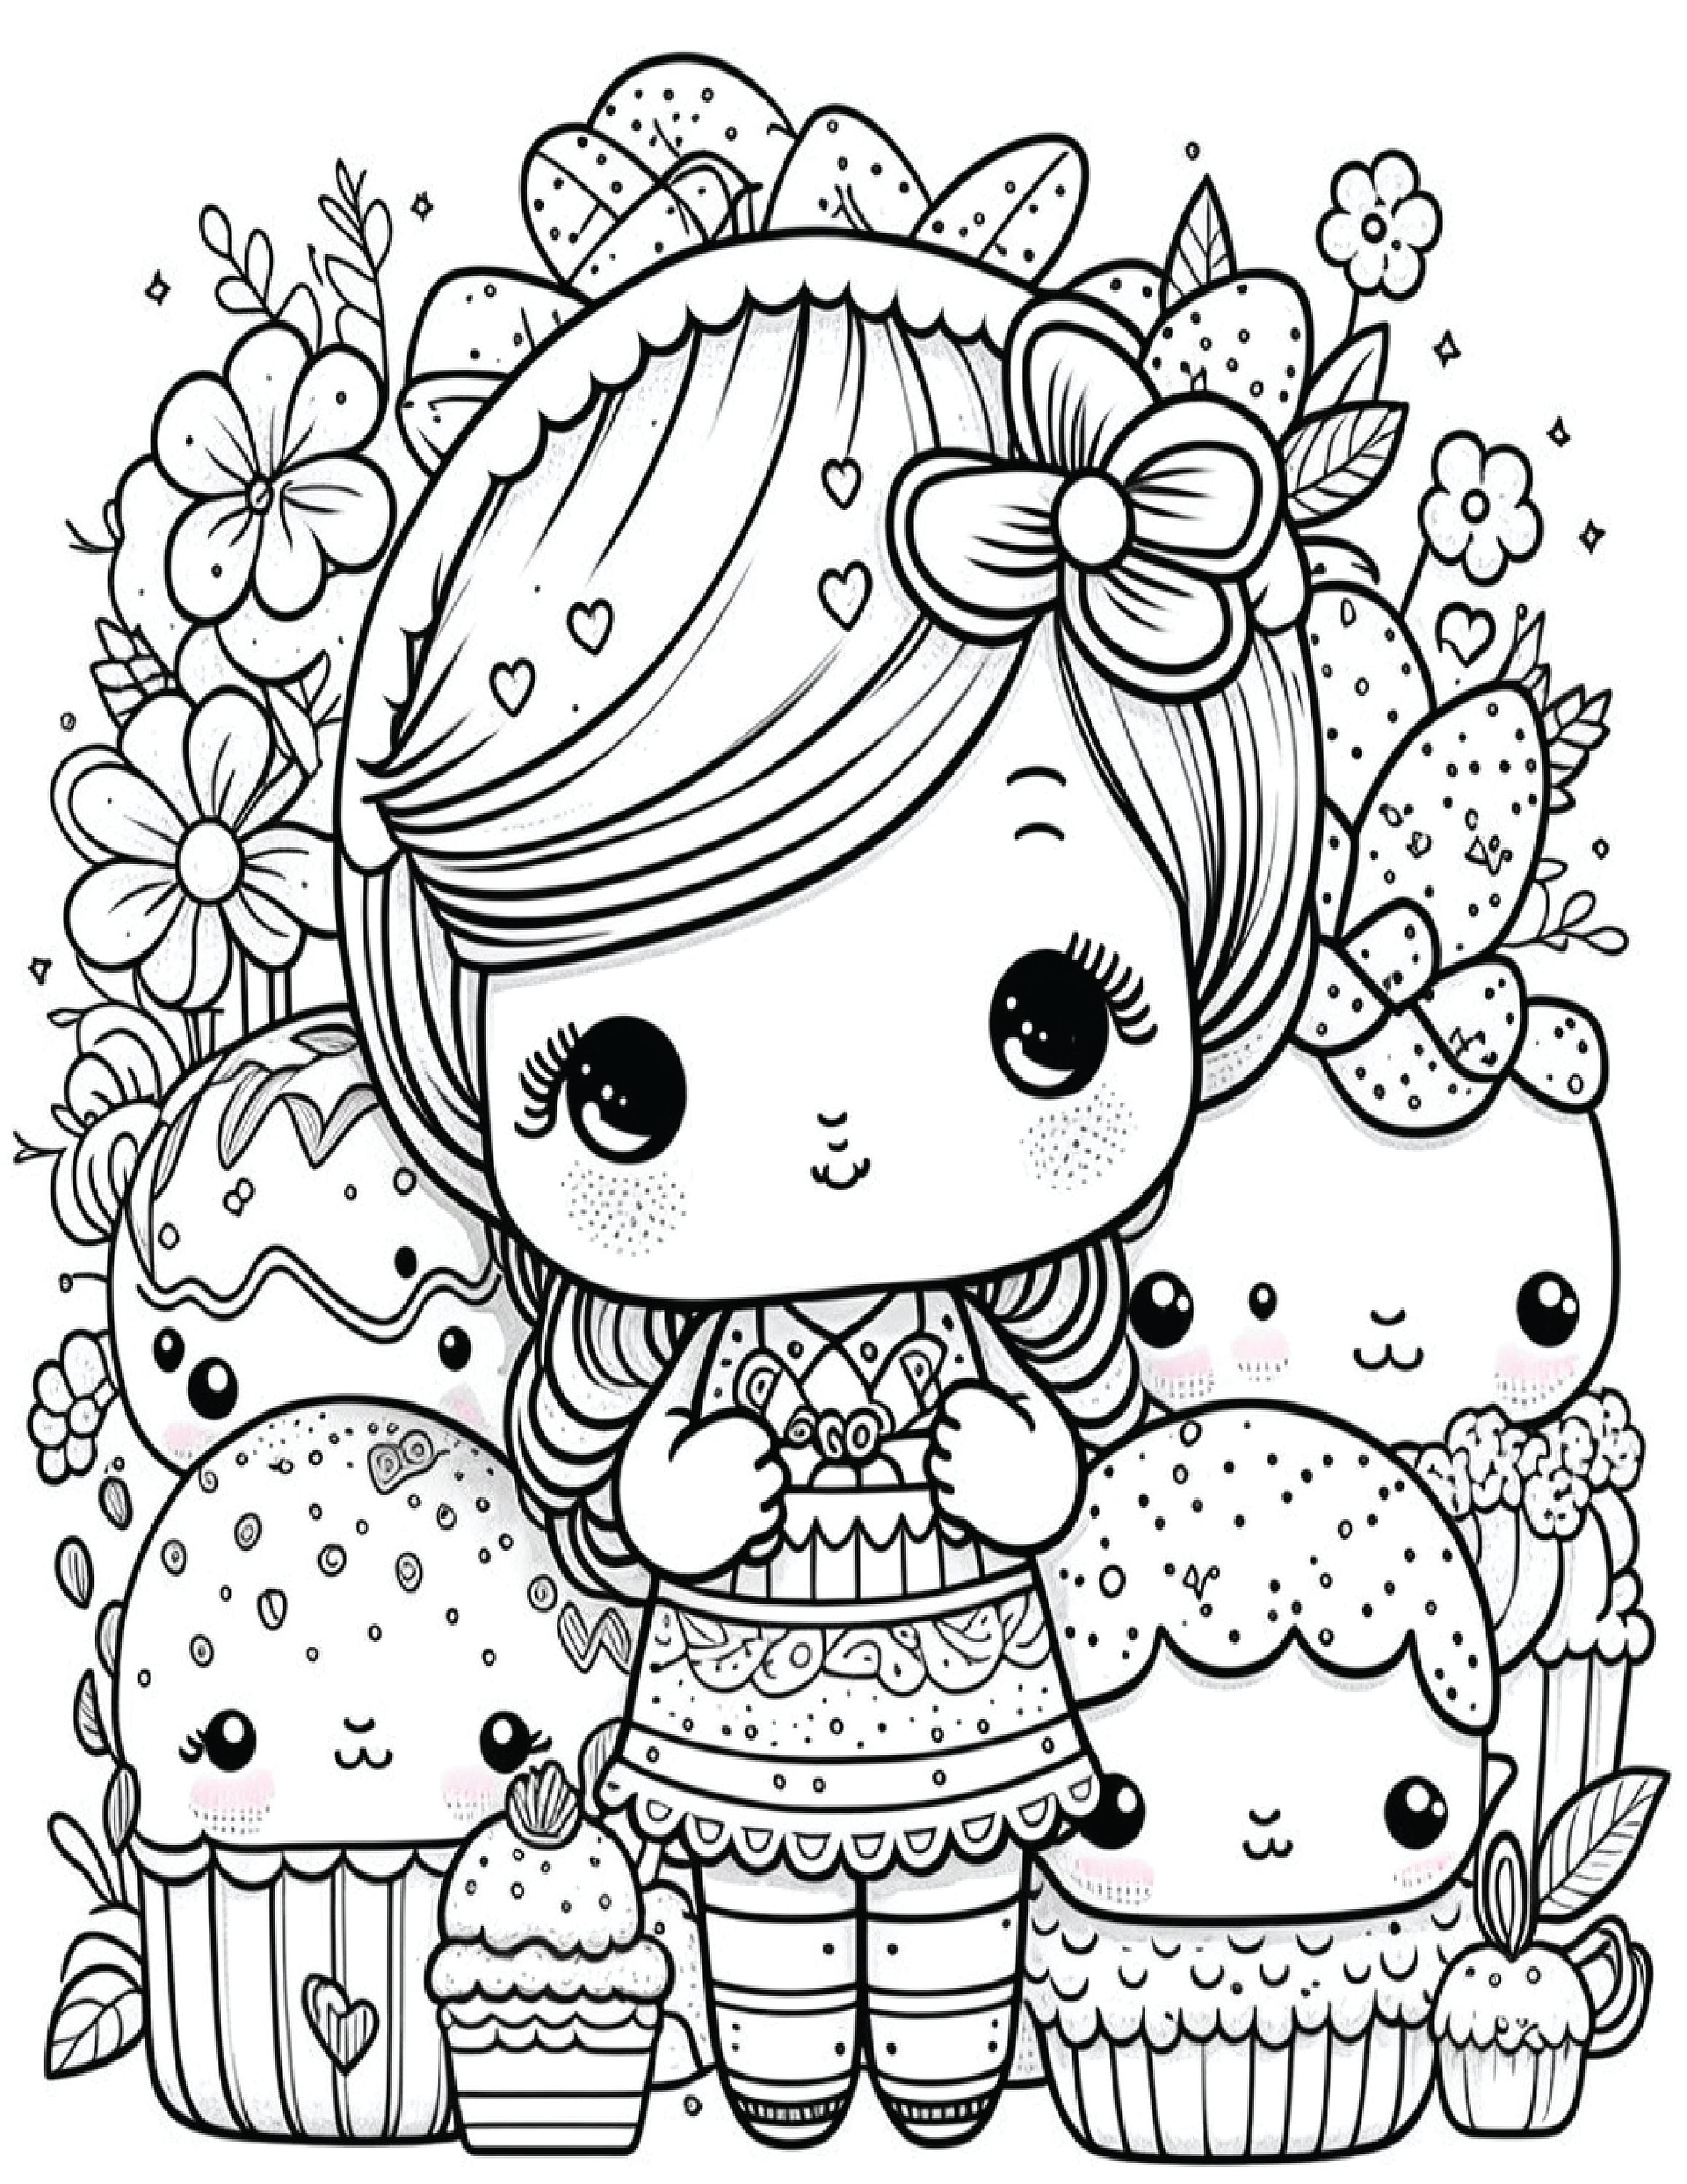 Kawaii Coloring Page Cute Cake Bow Birthday Coloring Book Black Stock  Vector by ©meine.illustrations 599221938